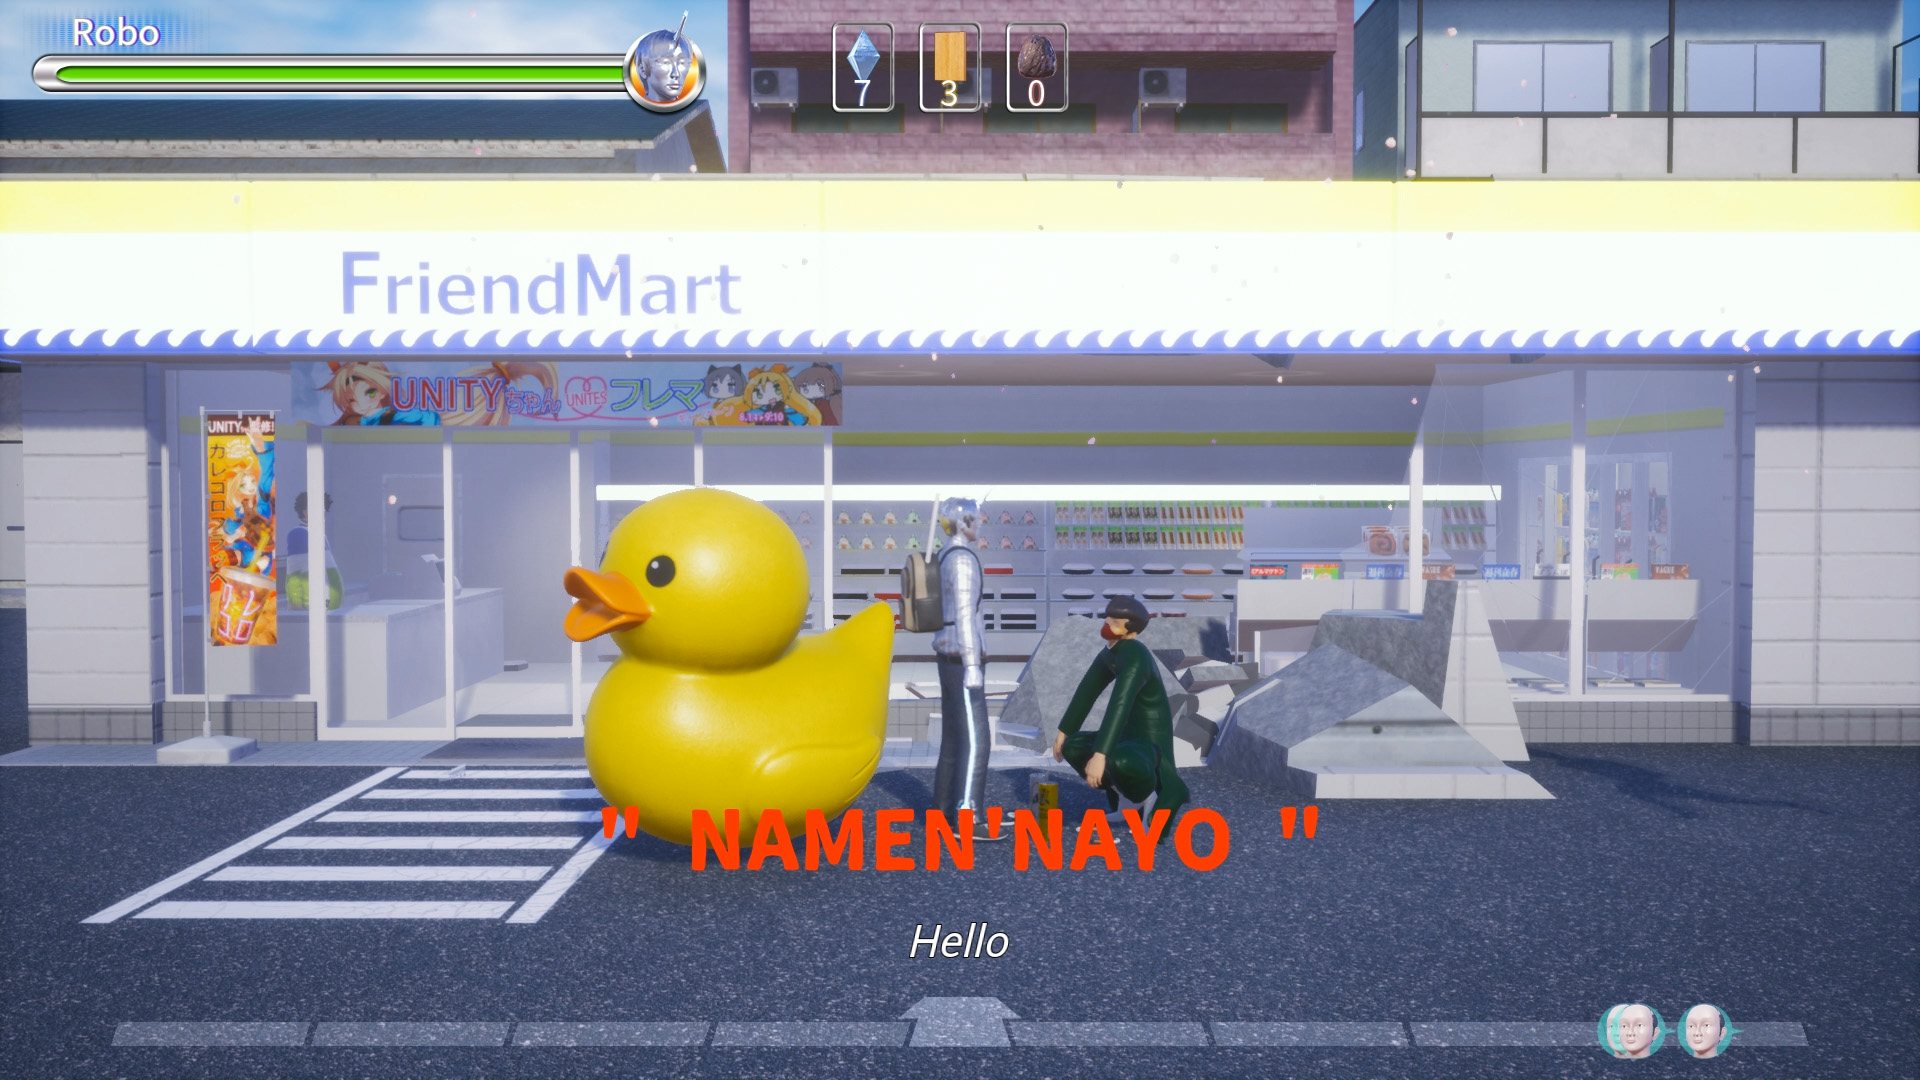 In a screenshot from Pull Stay, the robot protagonist stands in front of a convenience store between a gigantic rubber ducky and short, round security guard.